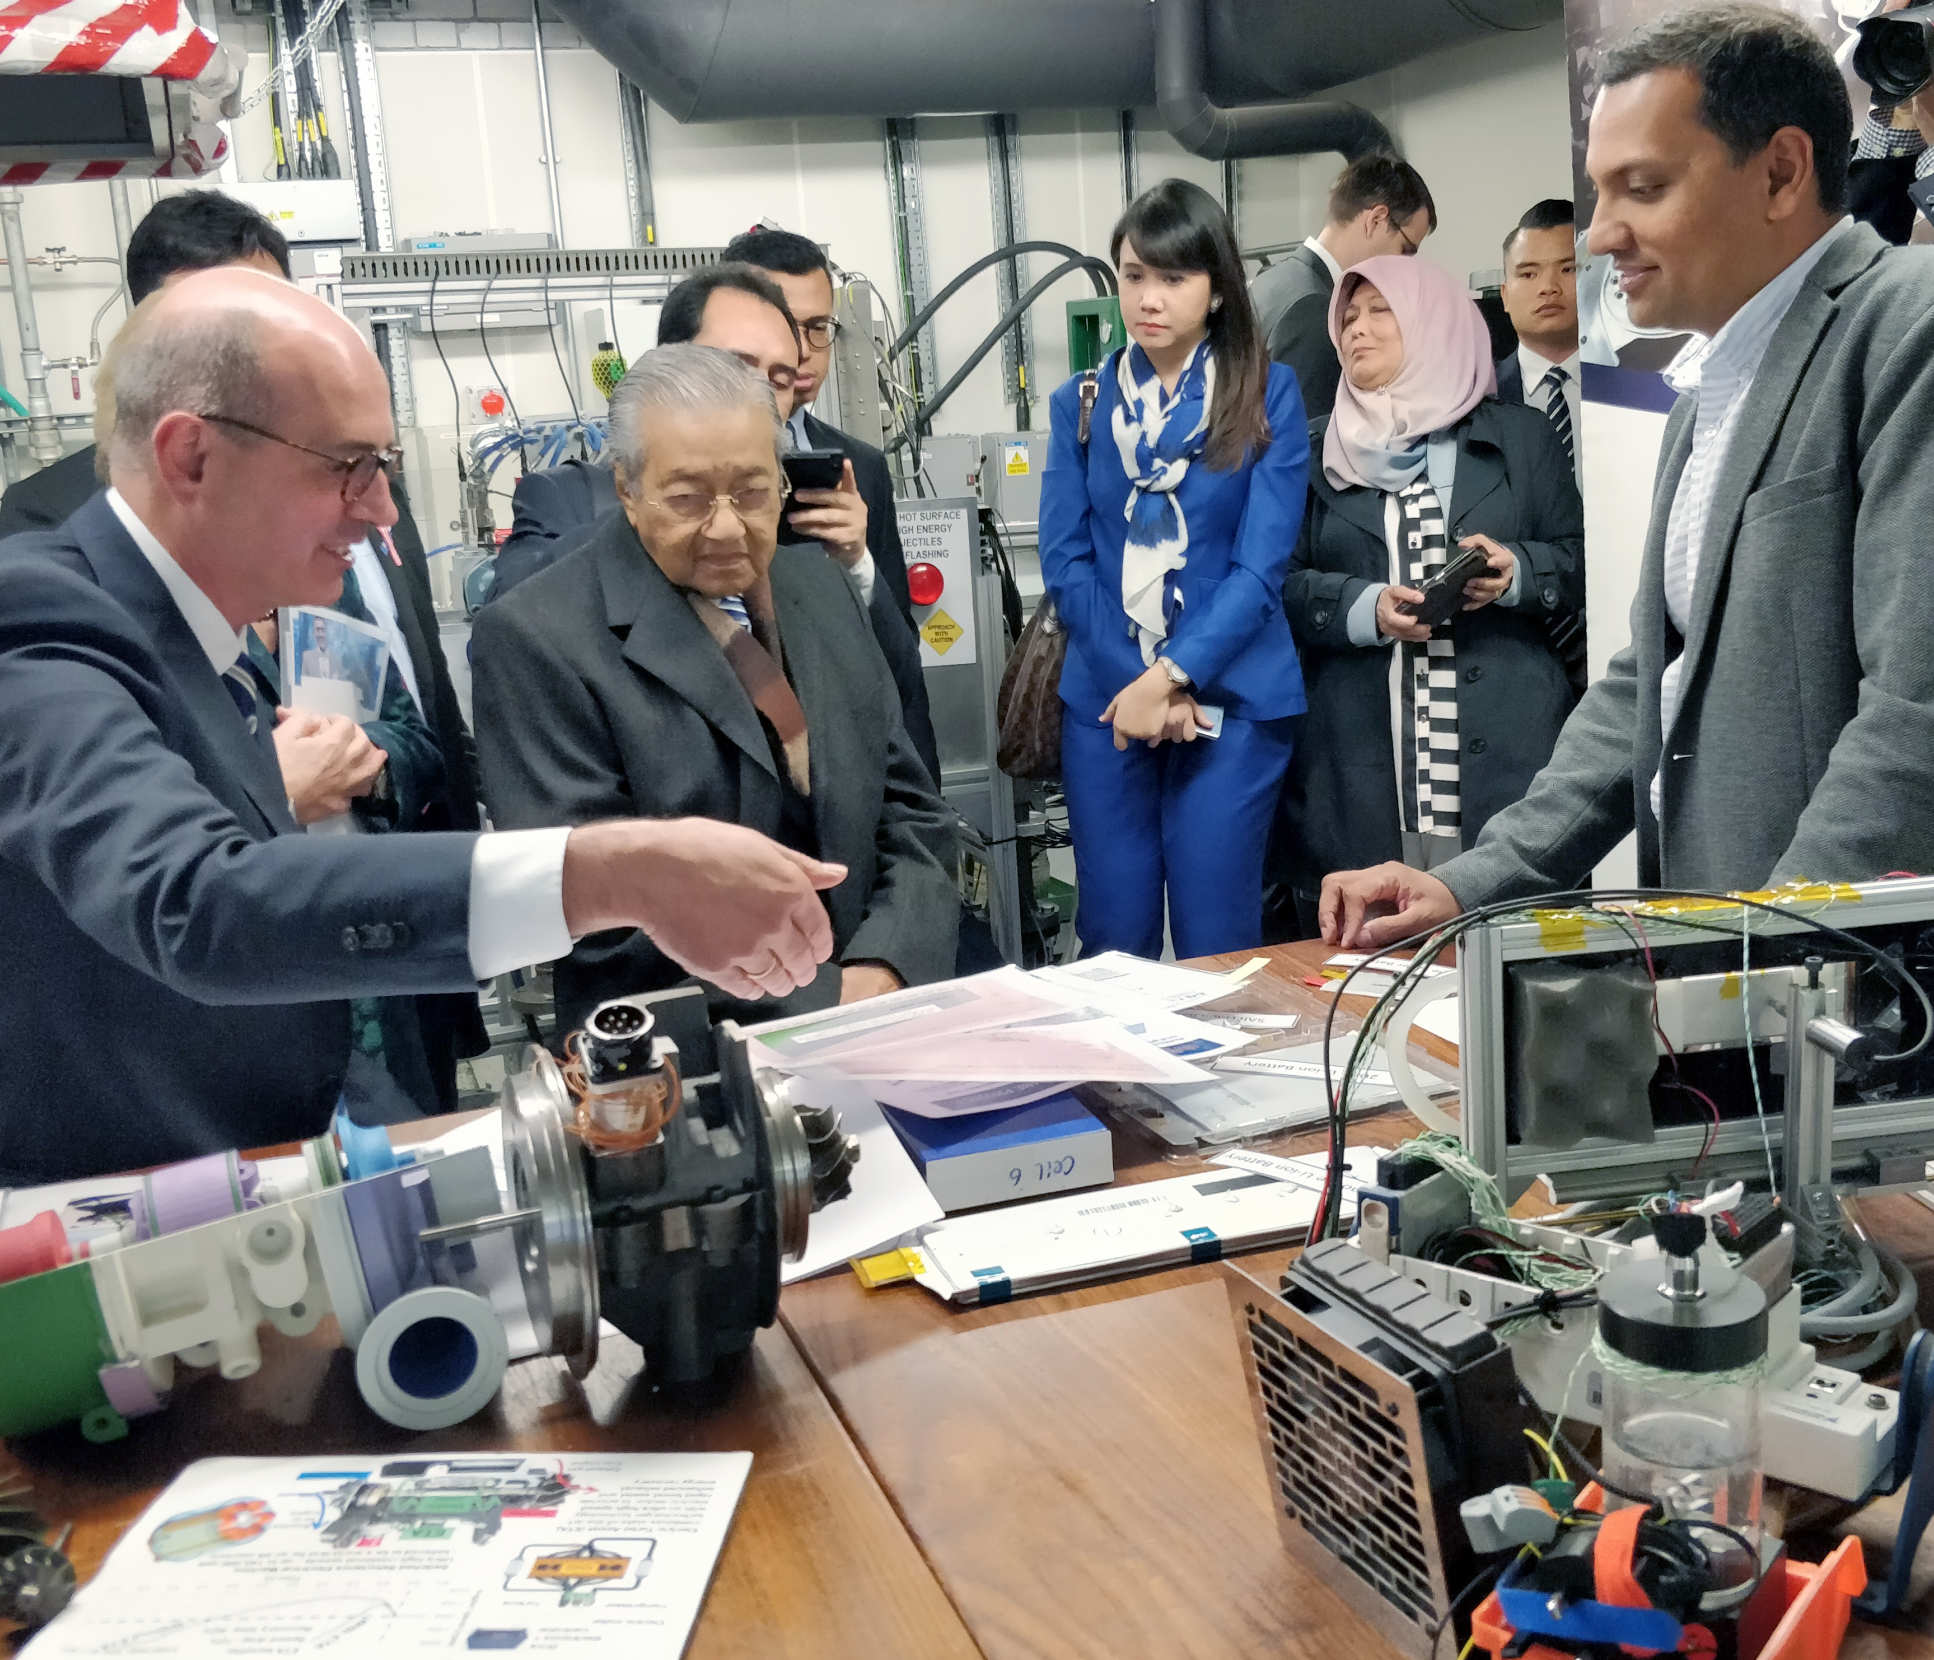 Prime Minister of Malaysia, Tun Dr Mahathir Mohamad, visits the Turbo Group laboratory, 24 September 2018